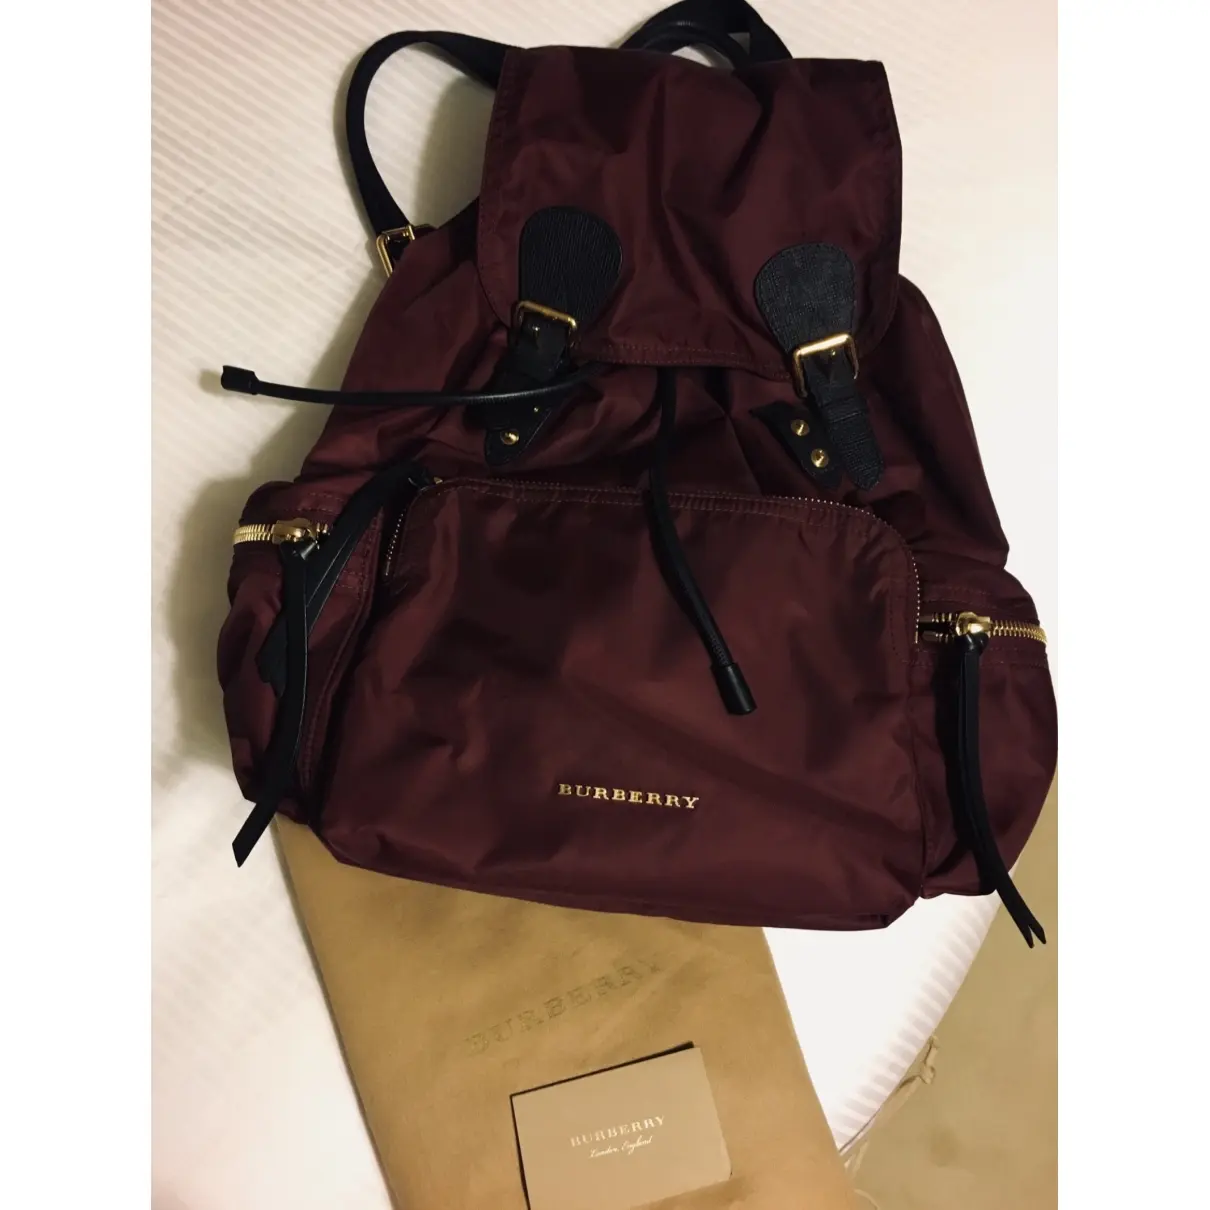 Burberry The Rucksack cloth backpack for sale